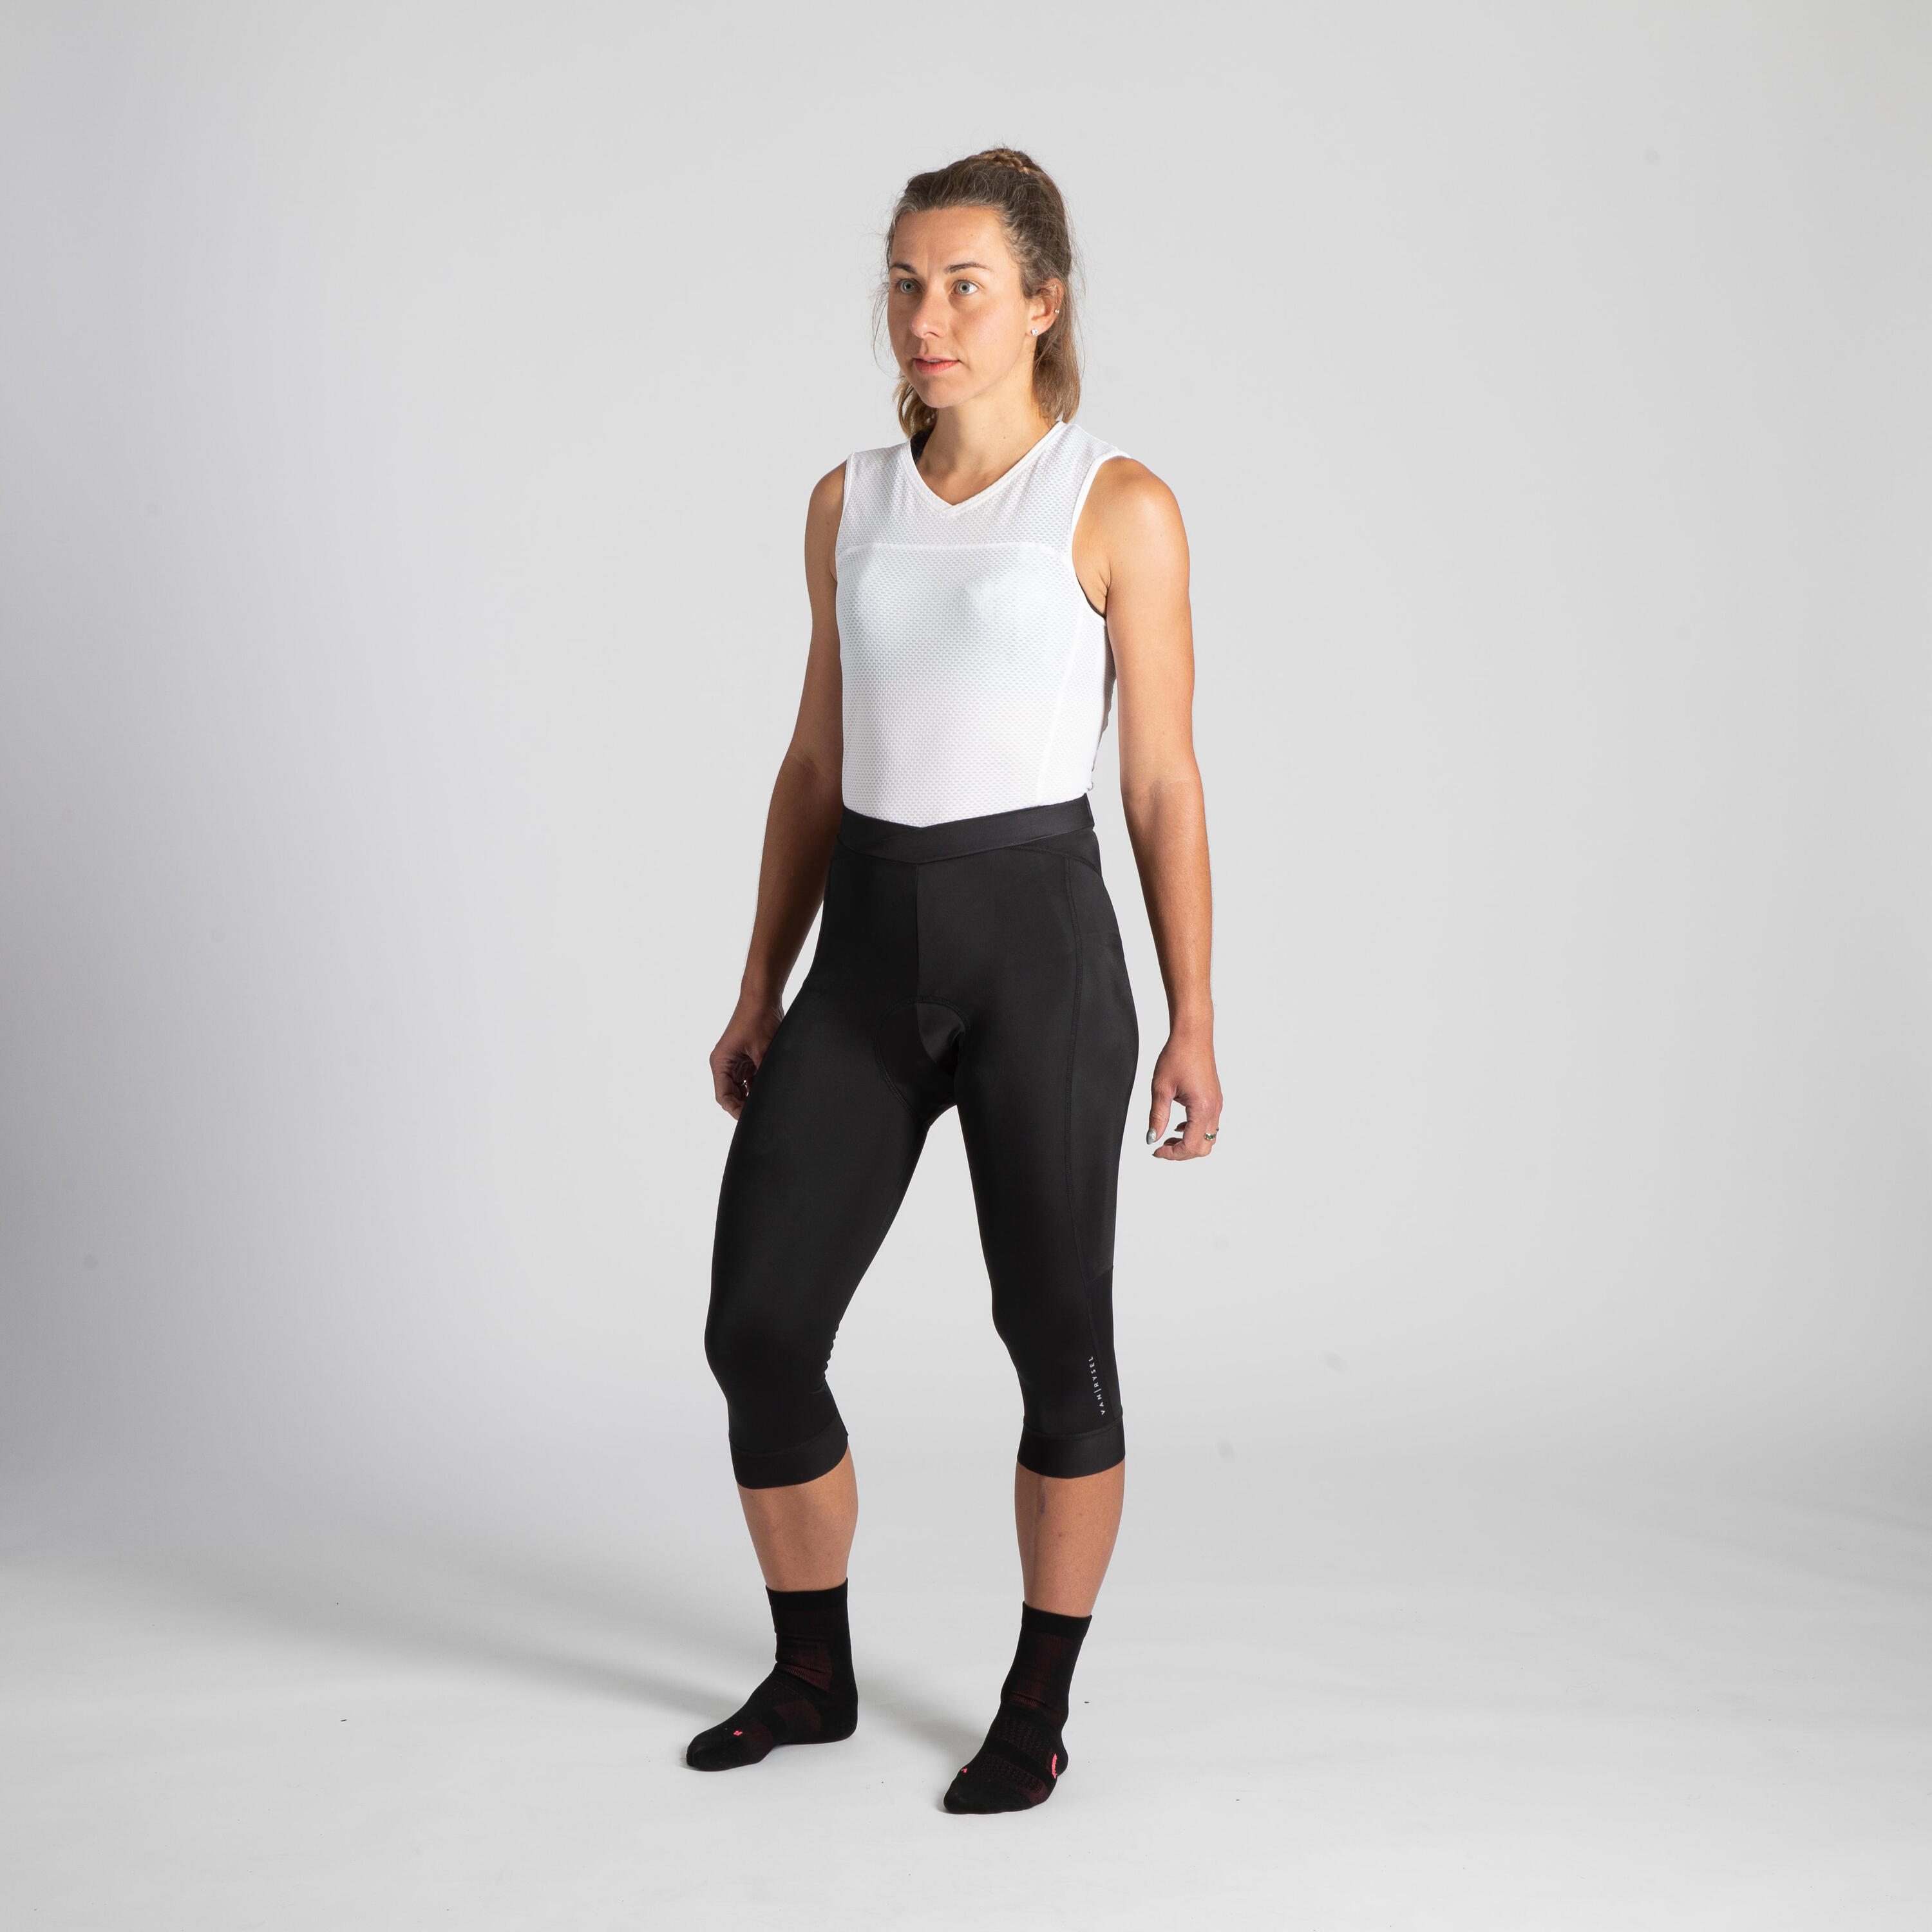 900 Women's Cropped Bibless Cycling Tights - Black 2/4